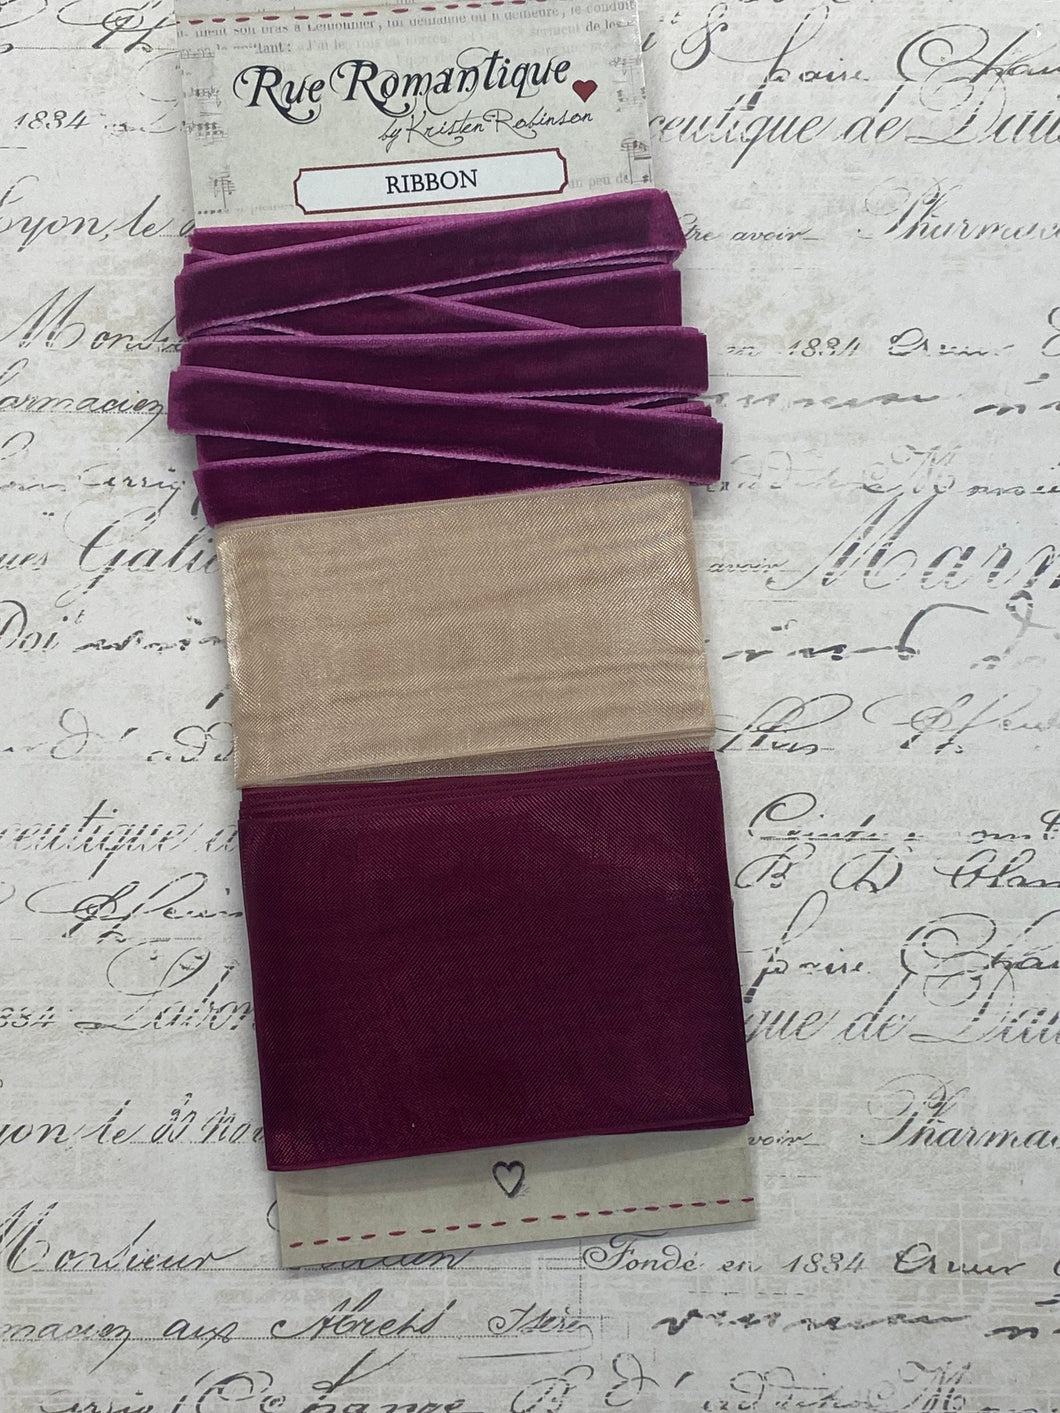 Rue Romantique Pack of 3 Ribbons- Burgundy